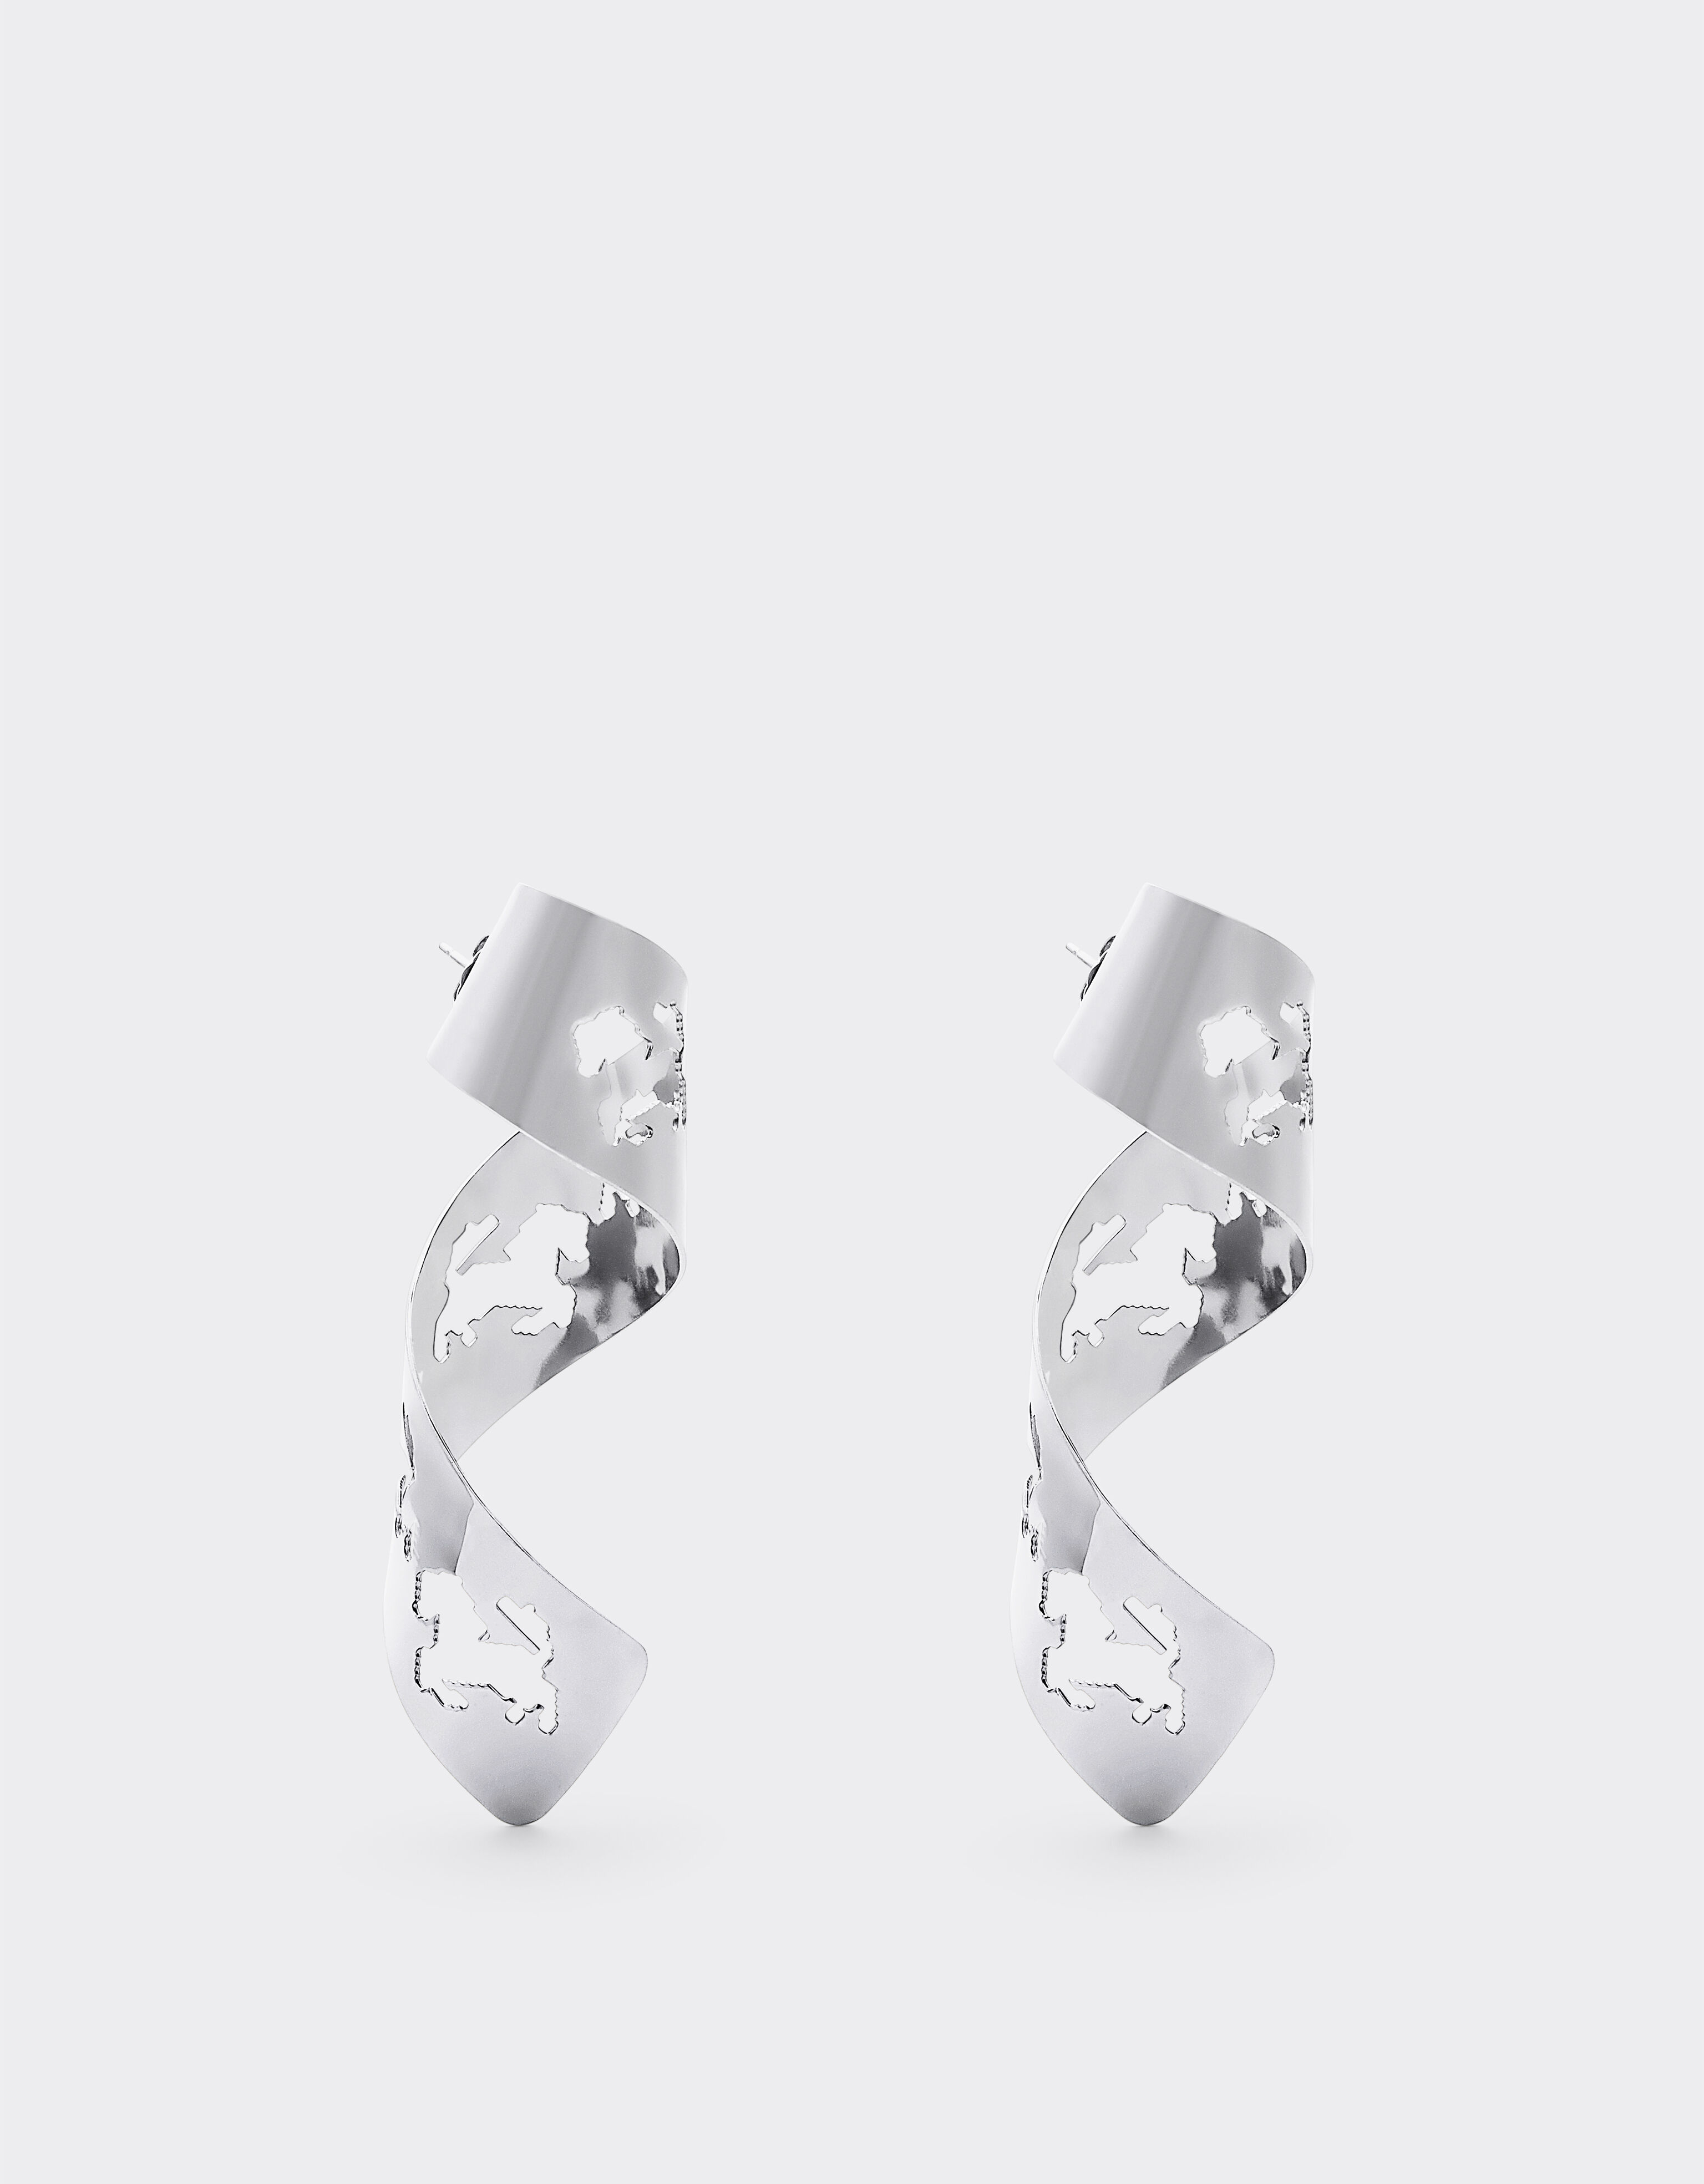 Ferrari Spiral earrings with Prancing Horse perforated pattern Charcoal 20010f